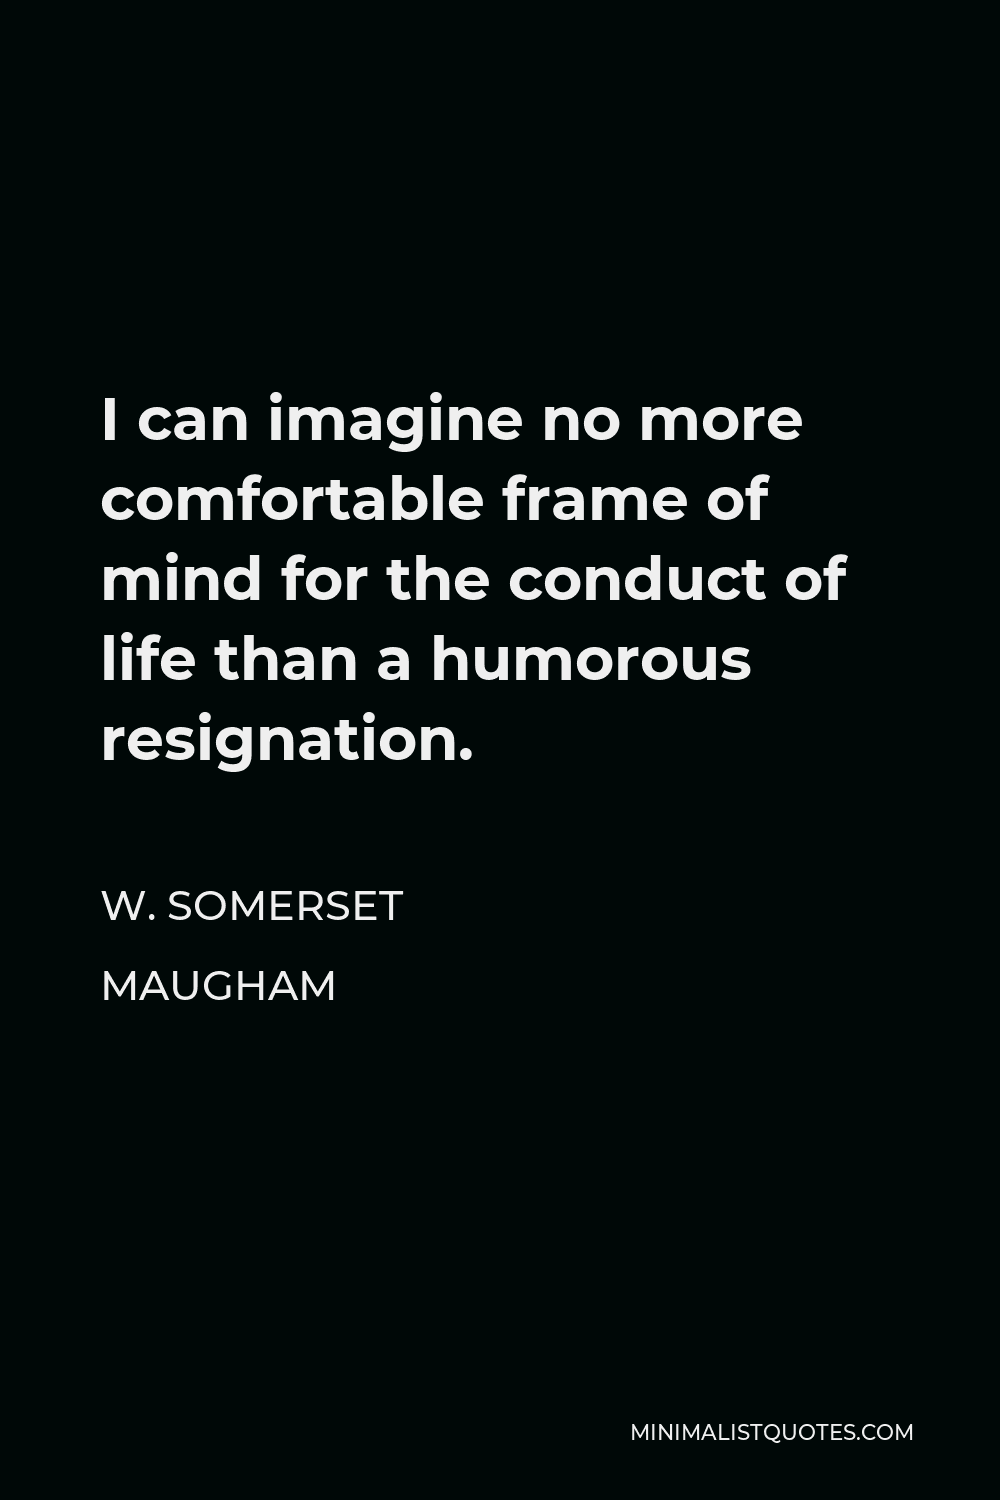 W. Somerset Maugham Quote - I can imagine no more comfortable frame of mind for the conduct of life than a humorous resignation.